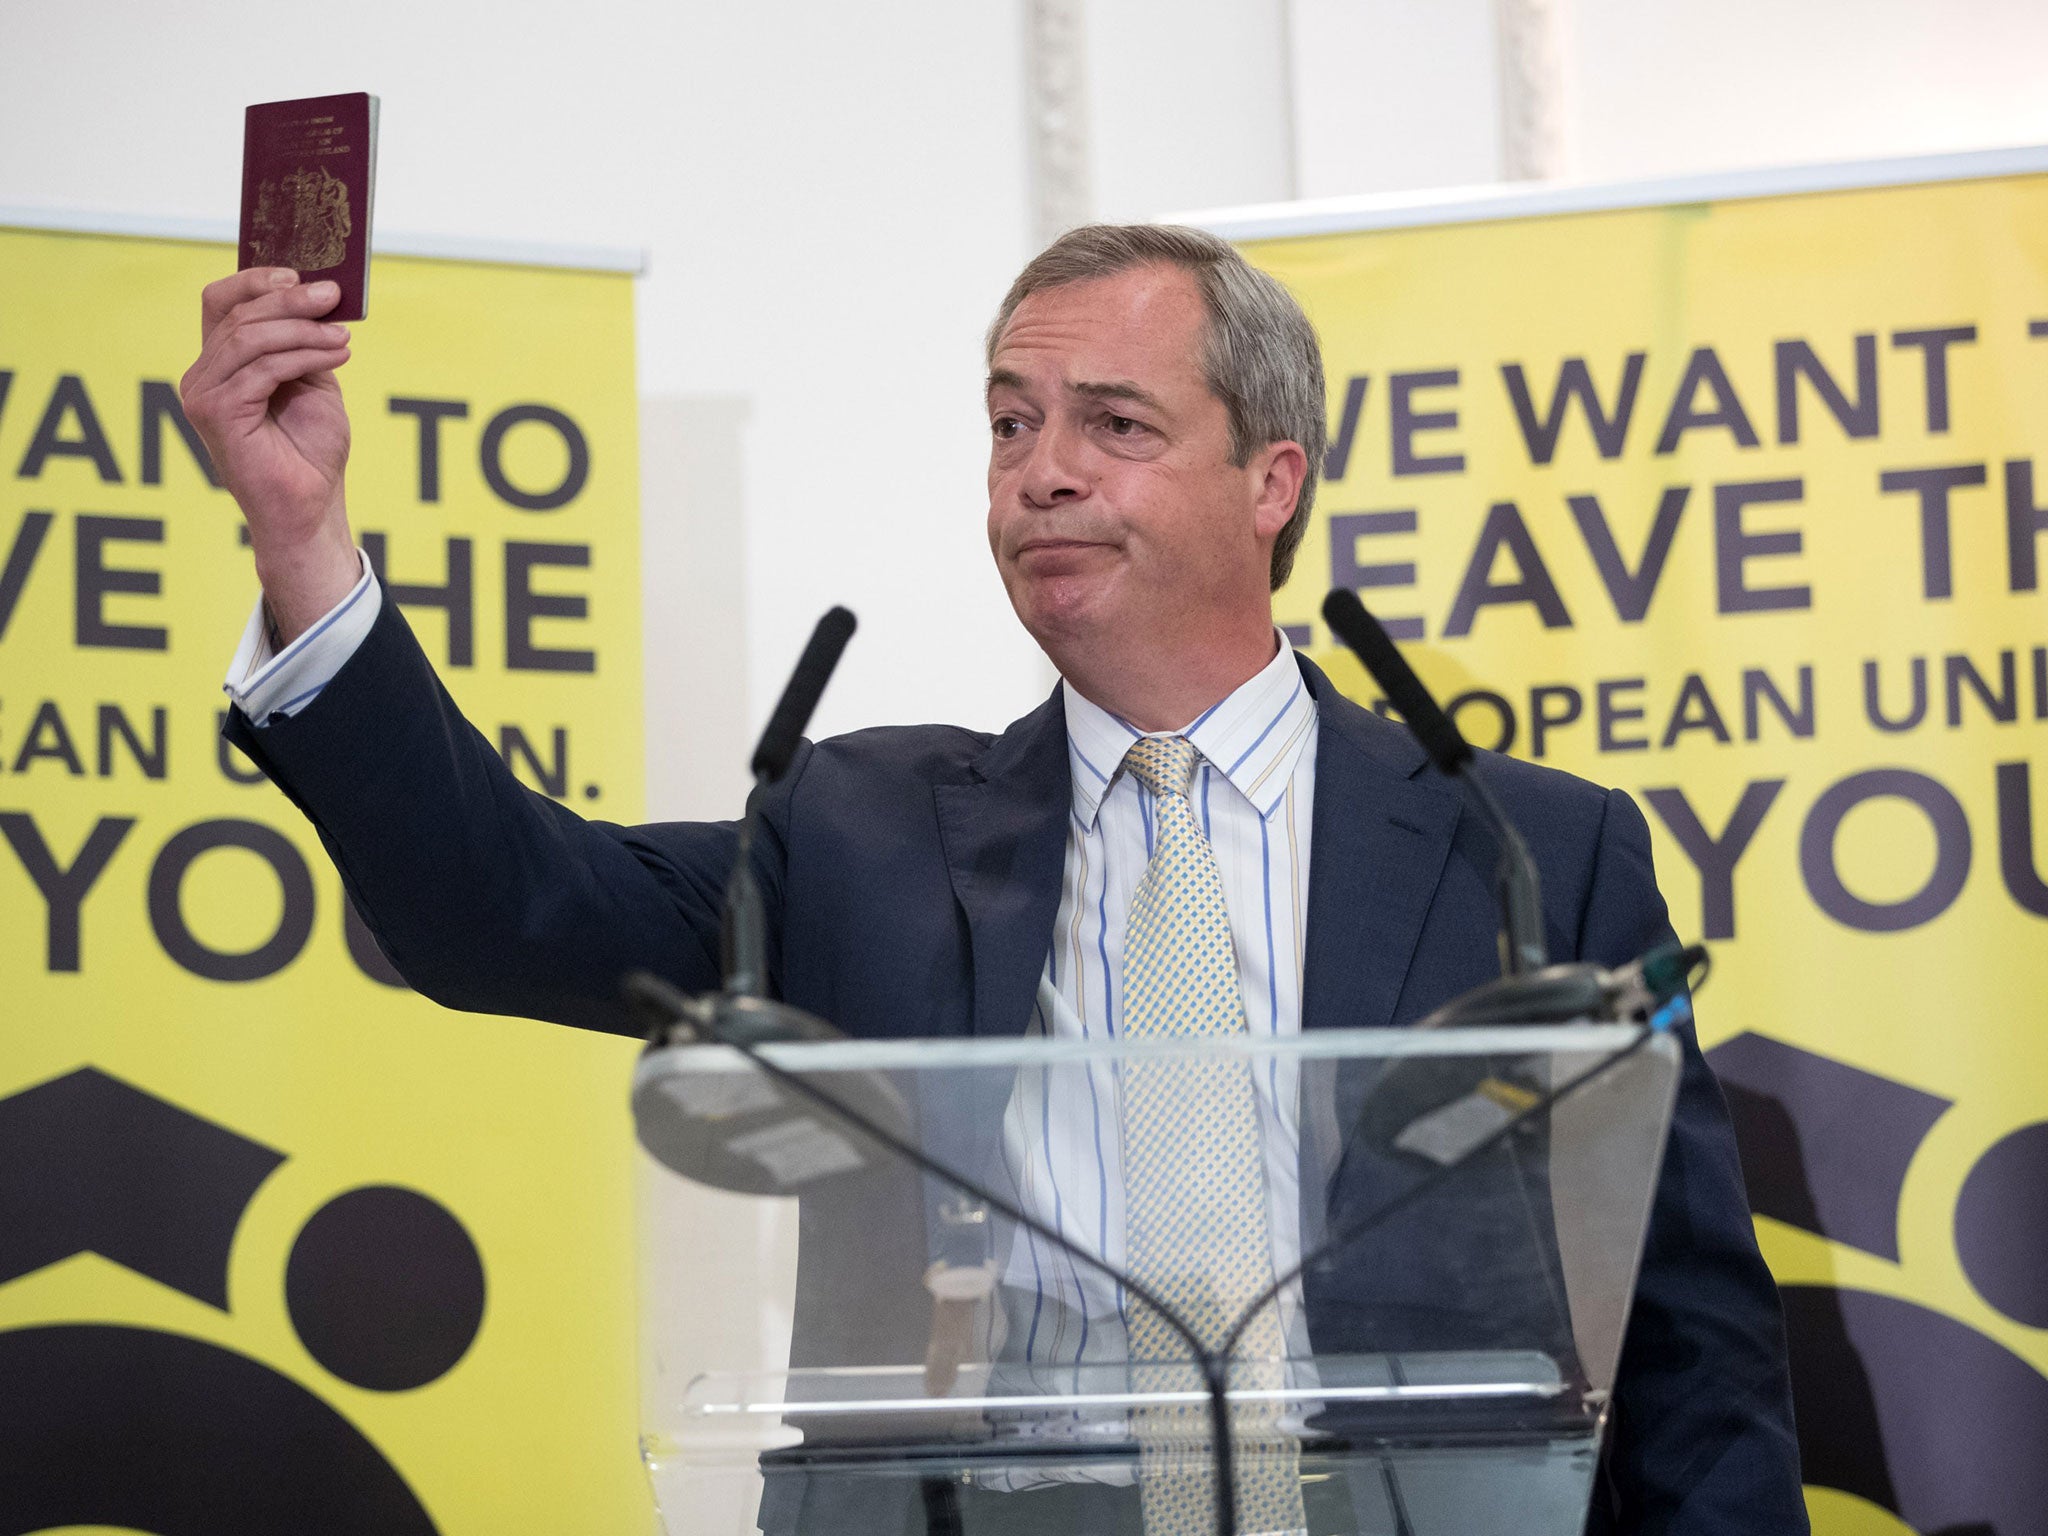 Ukip leader Nigel Farage holds up his British passport as he speaks at a Grassroots Out! campaign rally in Bristol